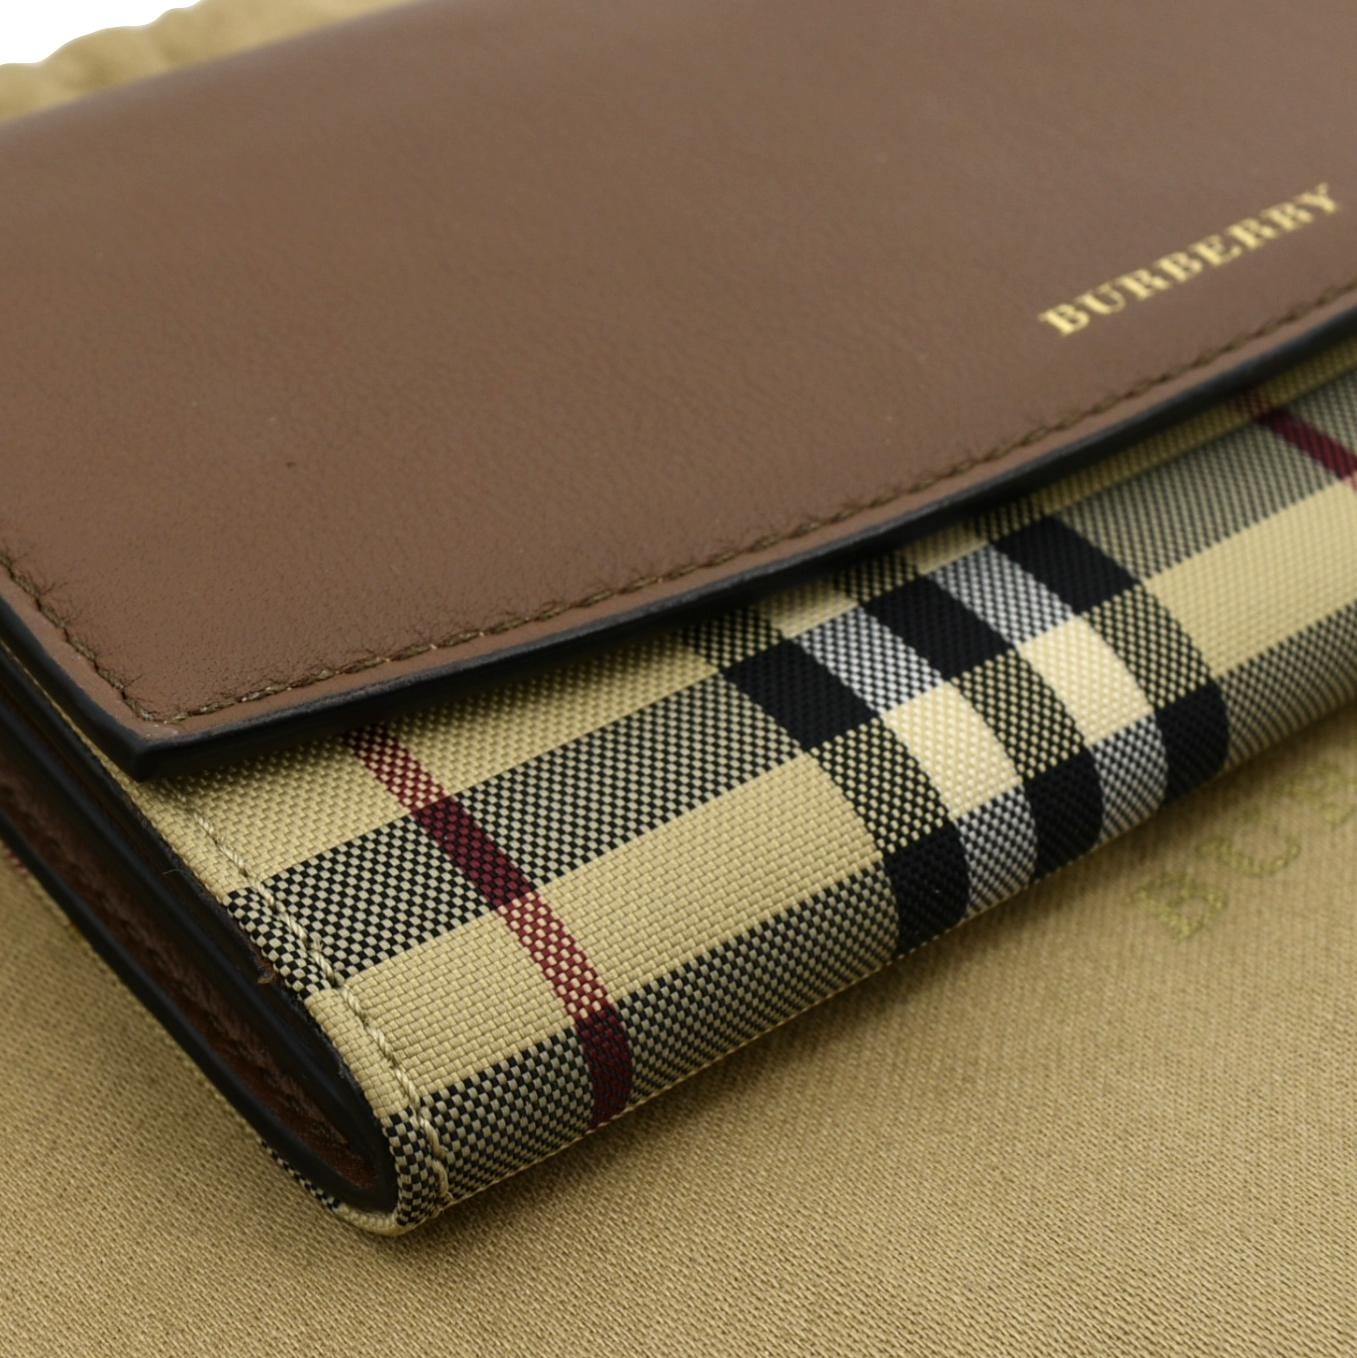 Burberry Vintage Check Leather Folding Wallet